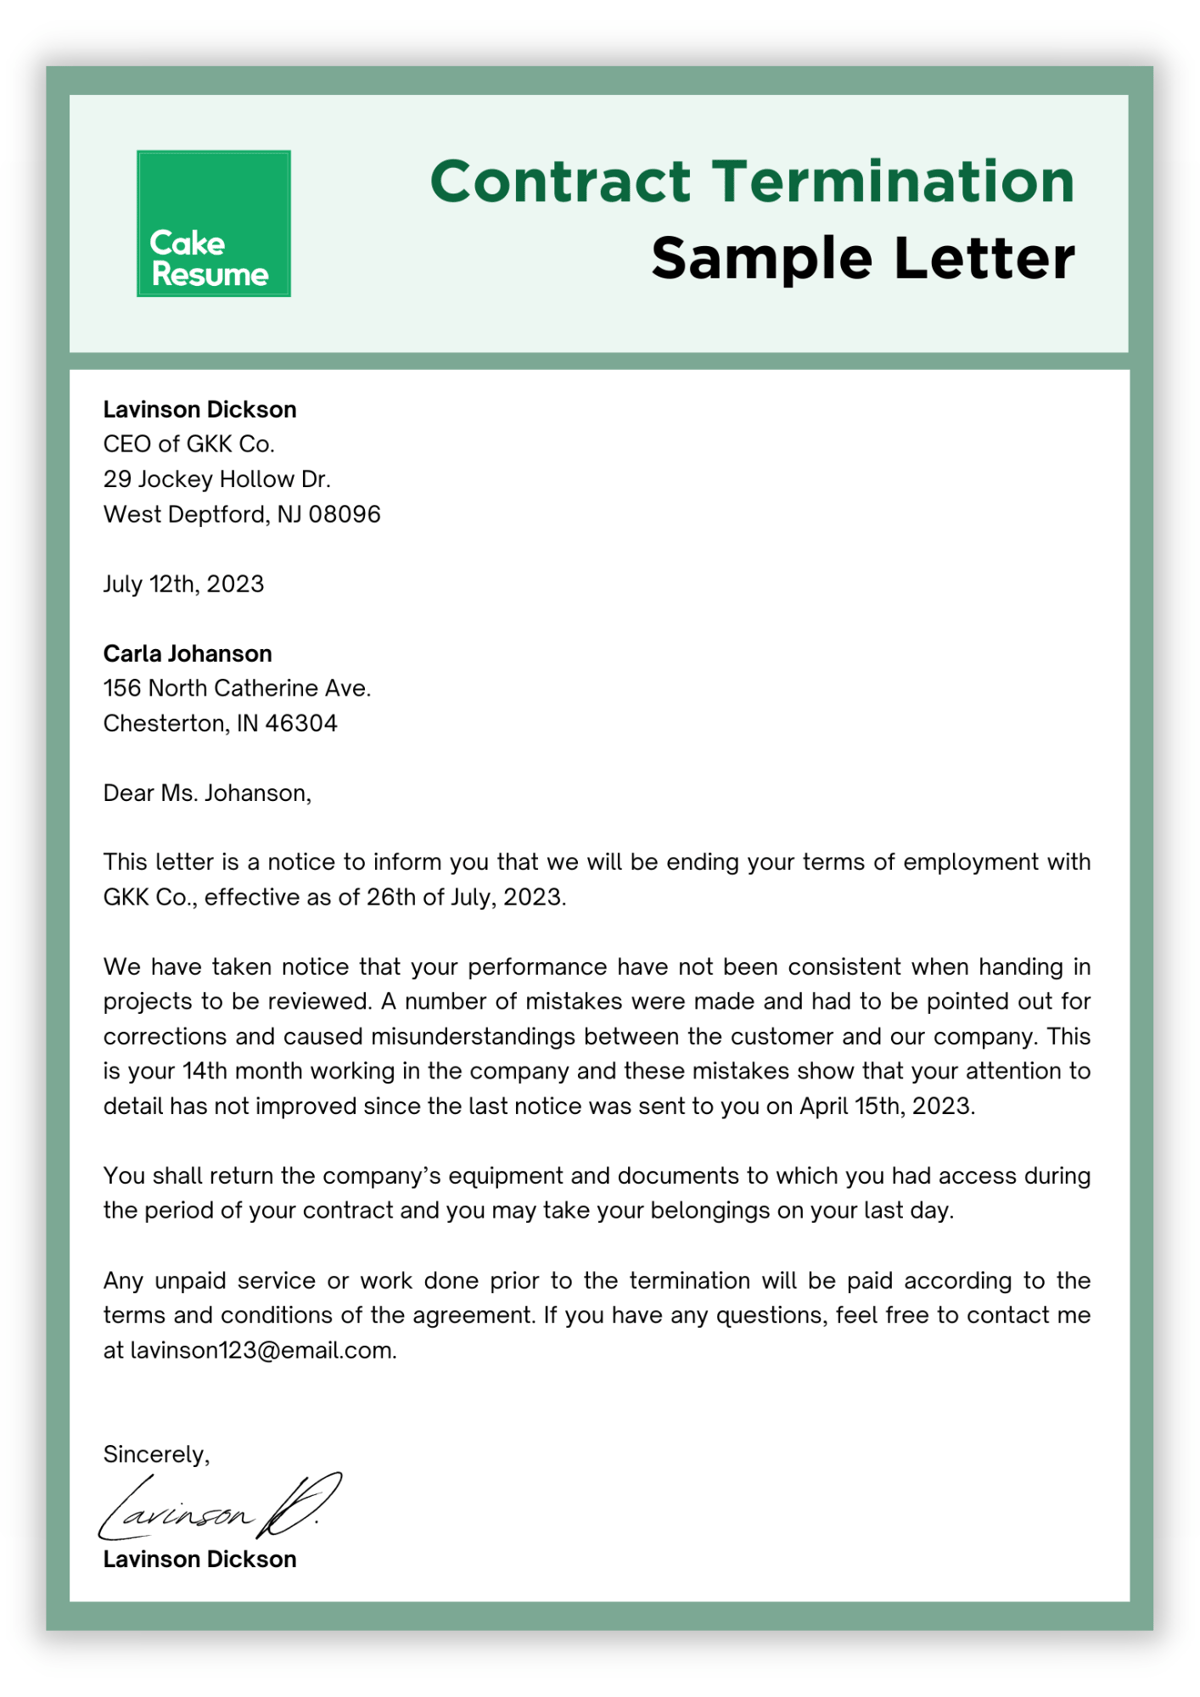 contract-termination-letter-samples